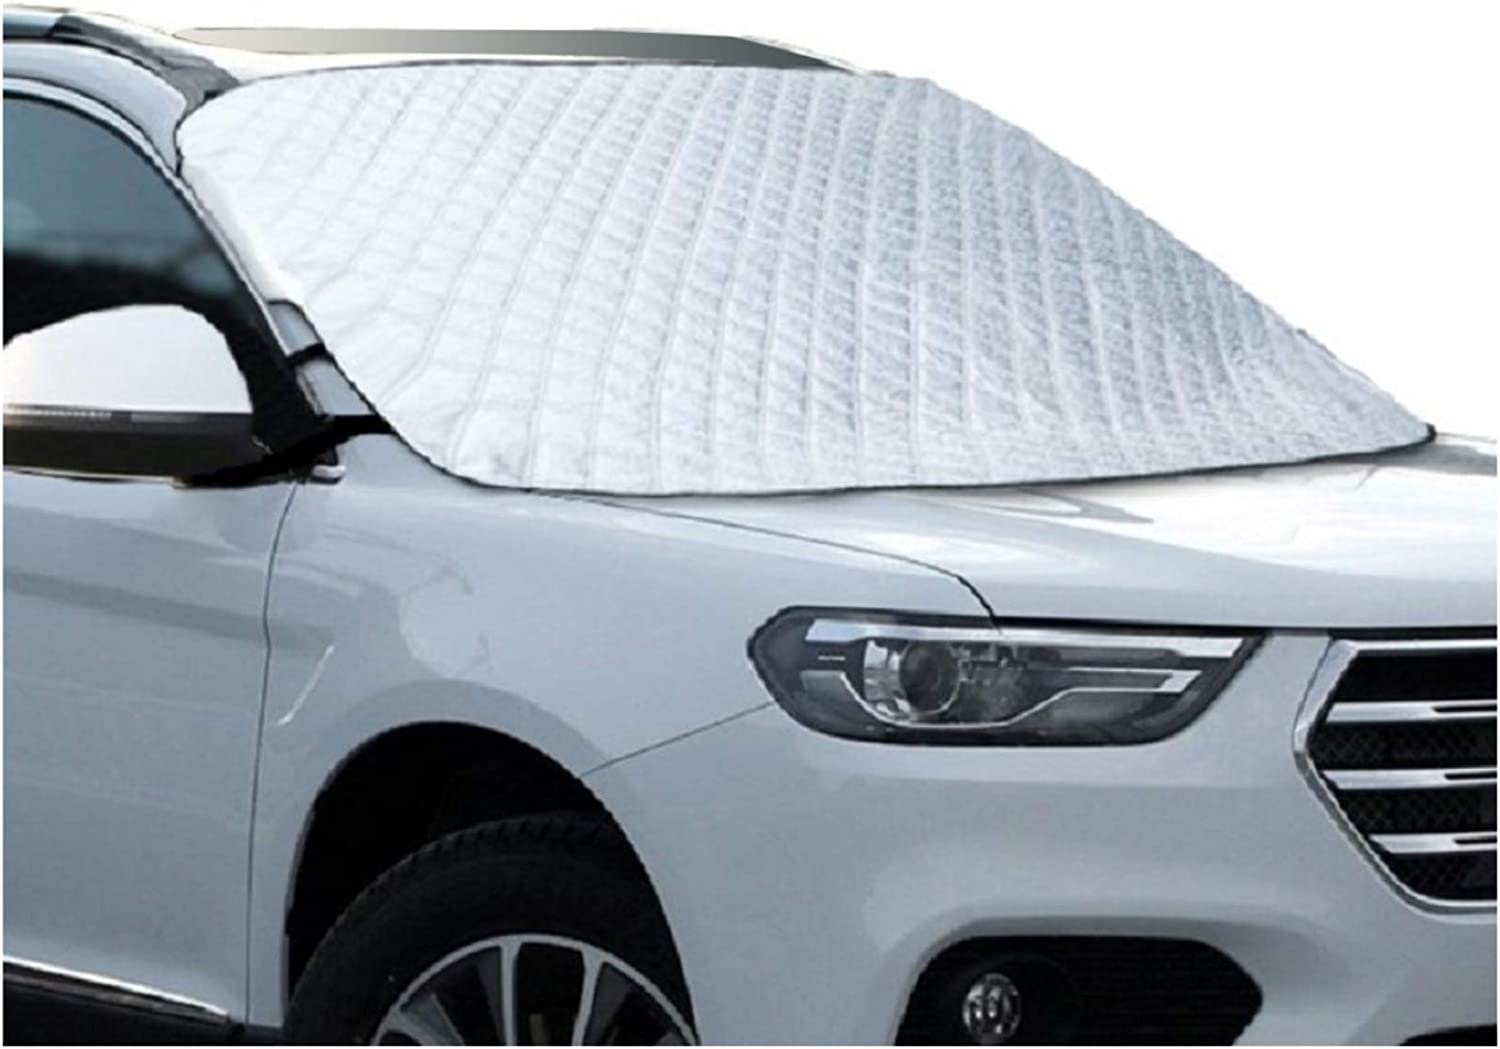 MITALOO Car Windshield Snow Cover with 4 Layers Protection, Frost Ice Removal Sun Shade for Winter Protection, Extra Large and Thick Windshield Ice Cover Fits for Cars Trucks Vans and SUVs Large Size (57" x 47")